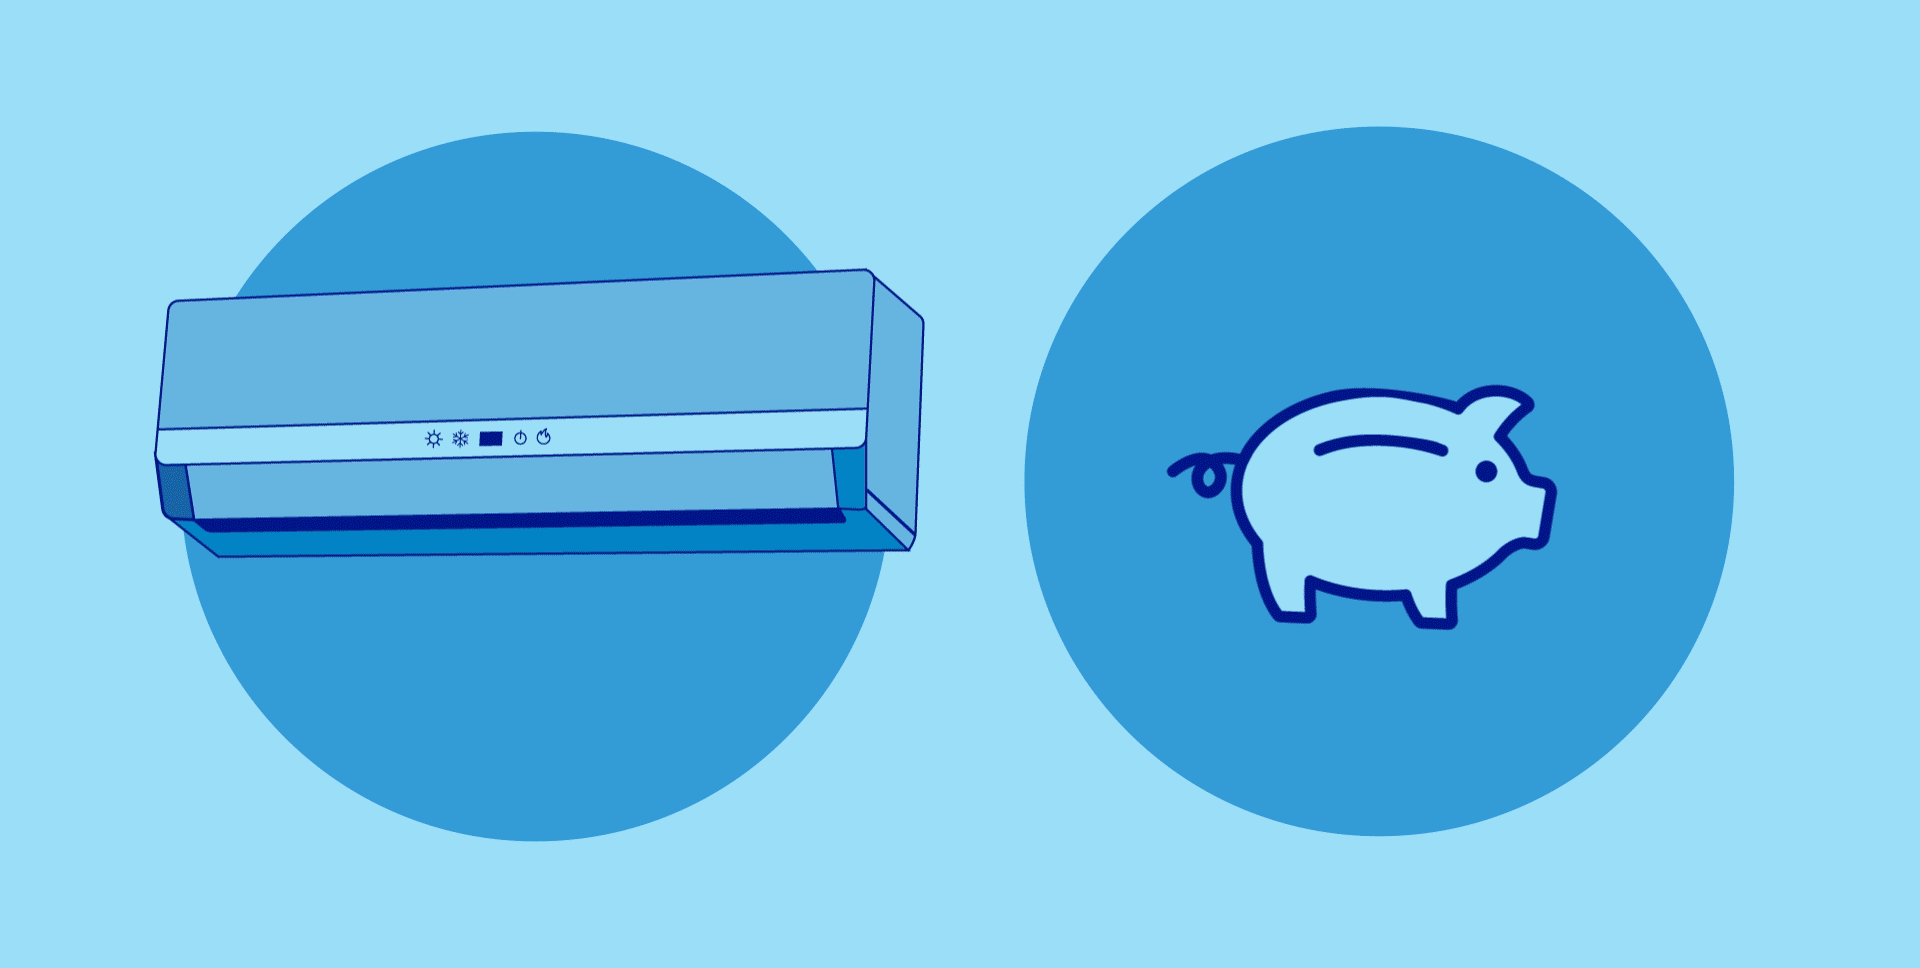  Illustration of a ductless heat pump emitting warm air and illustration of coins going into a piggy bank 